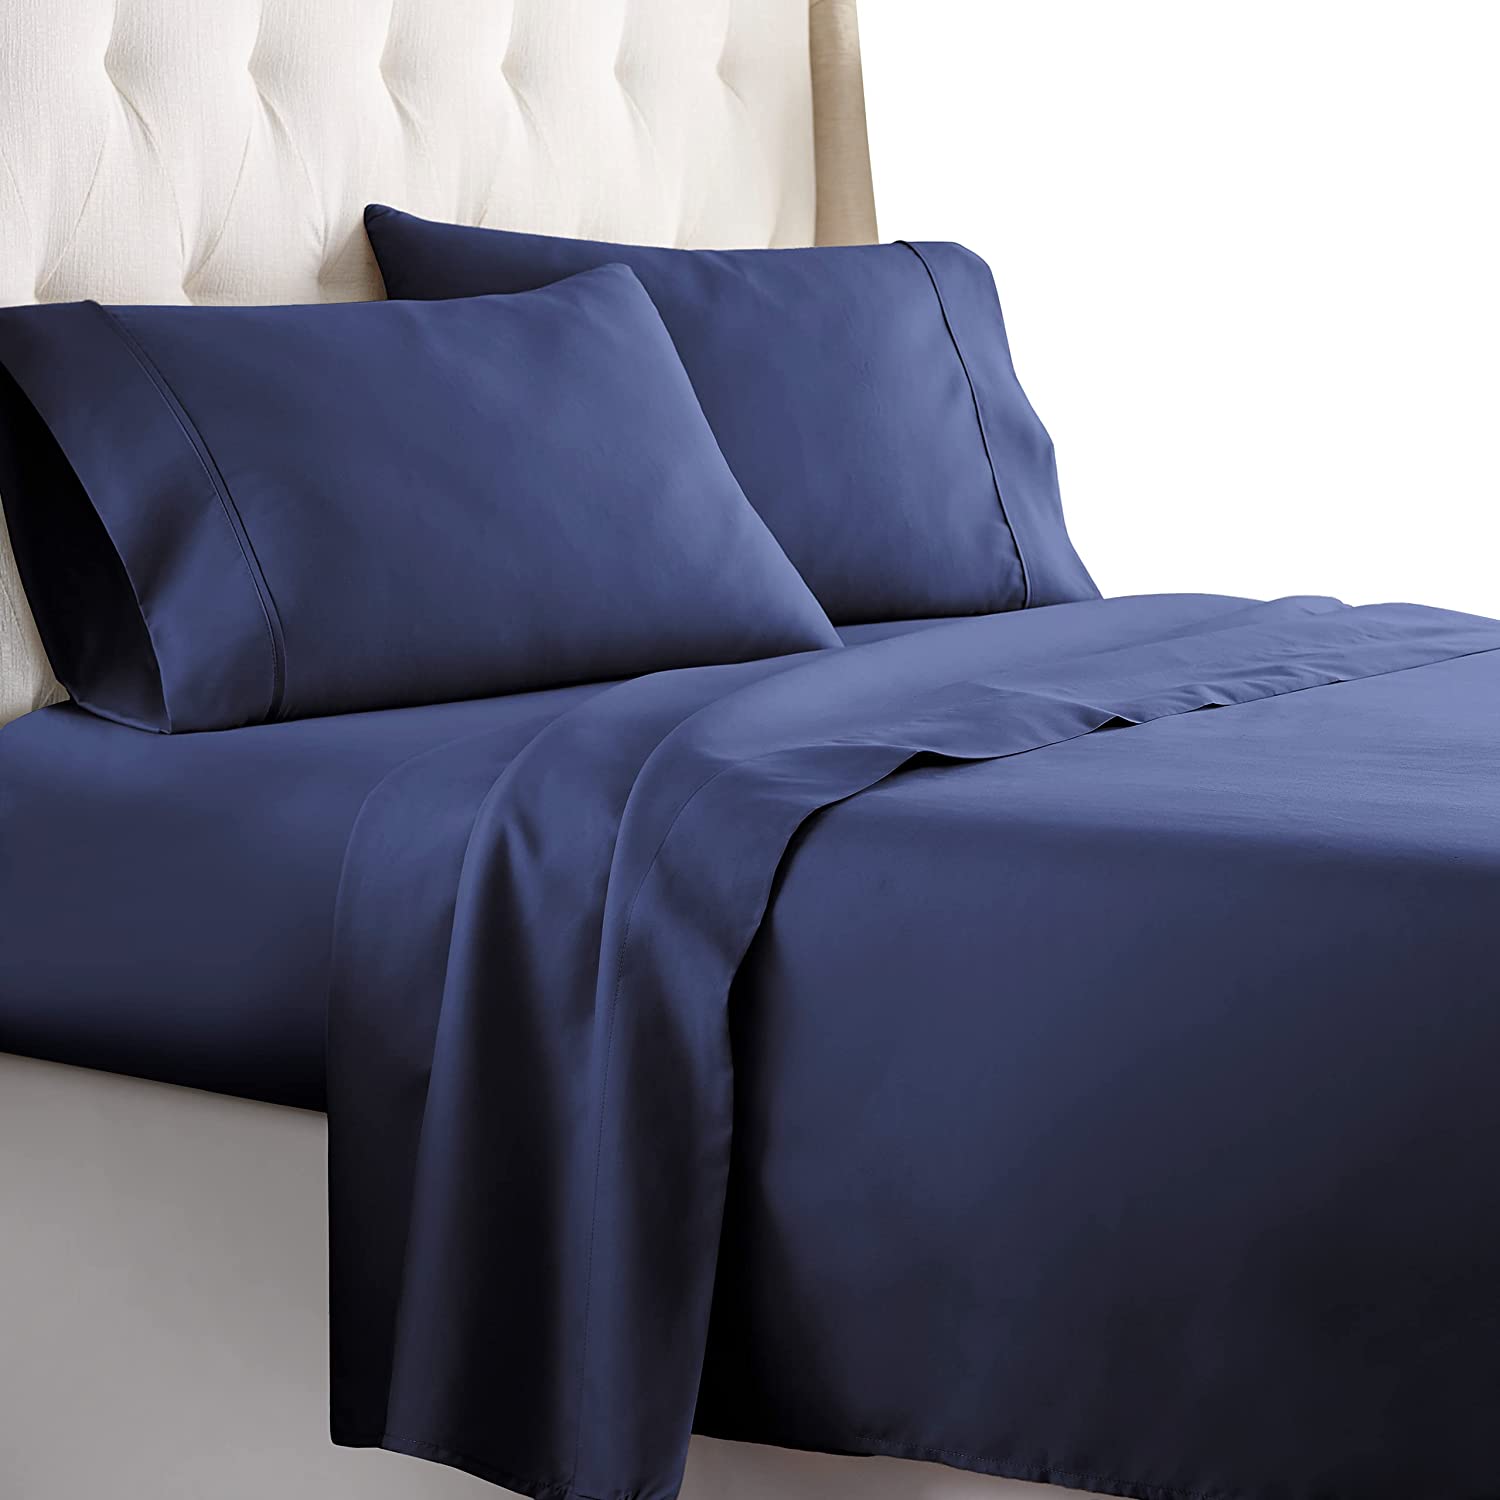 9 Inch Pocket Fitted Sheet Egyptian Cotton Navy Blue at-EgyptianHomeLinens.com